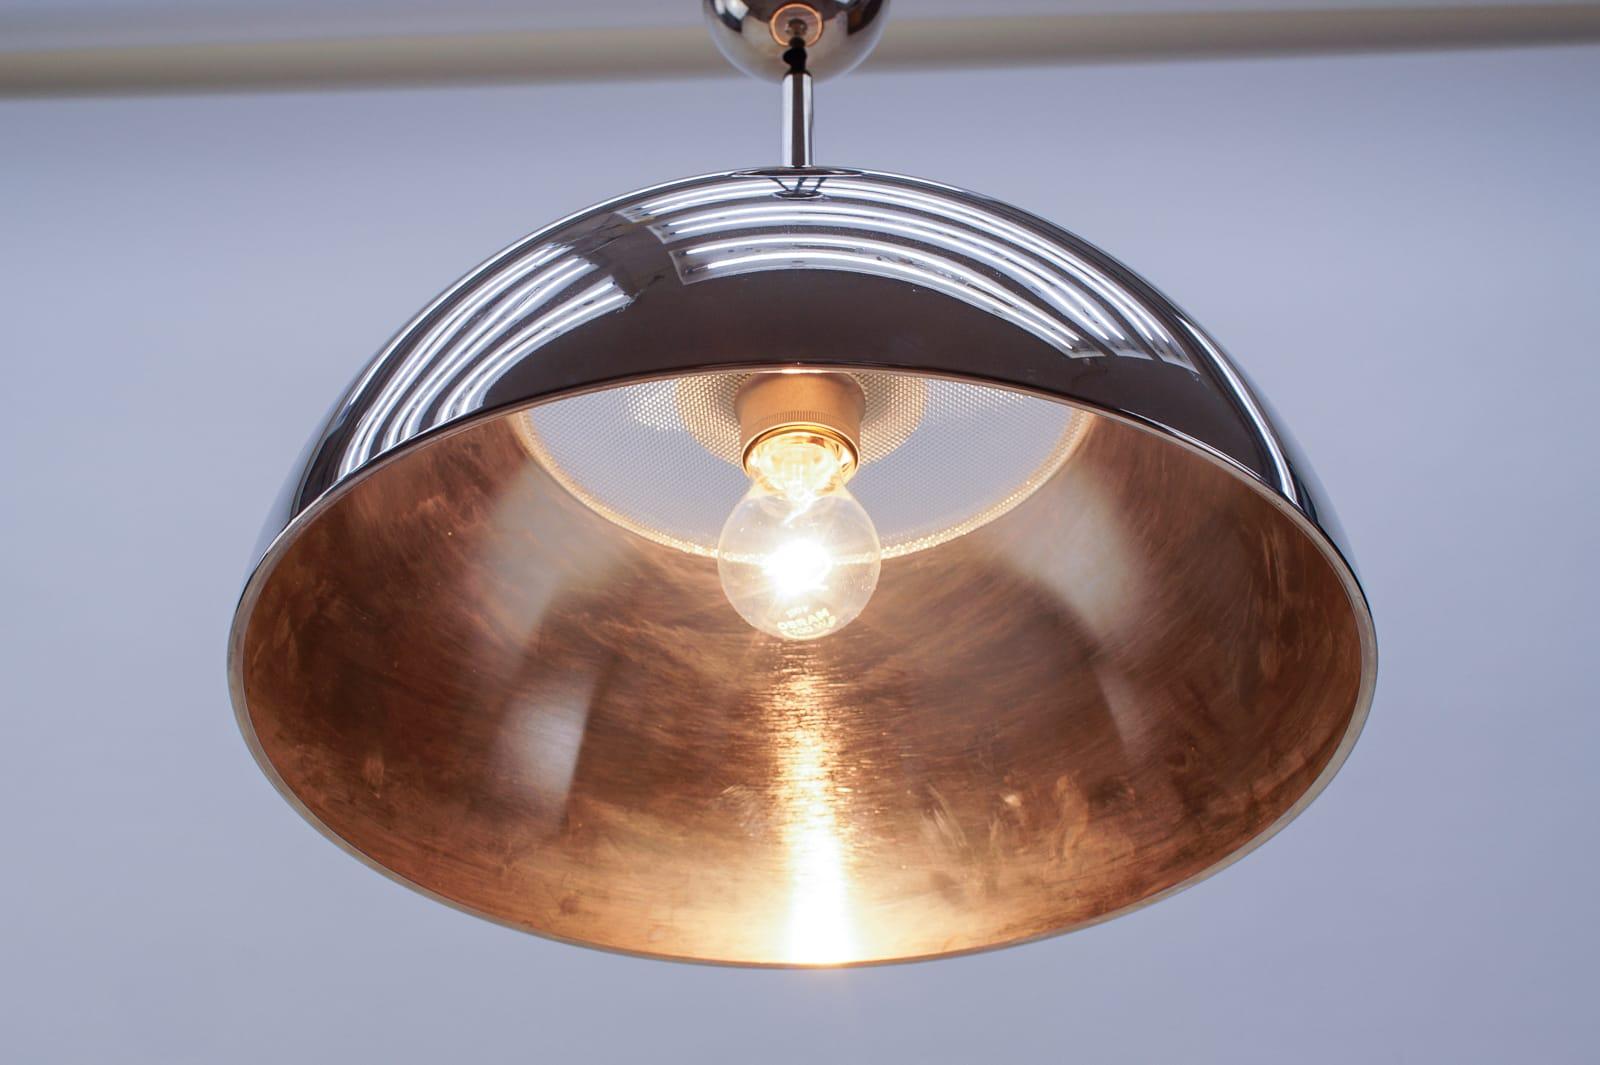 Florian Schulz Nickel Plated Pendant Lamp with Counterweight, Germany, 1970s For Sale 4